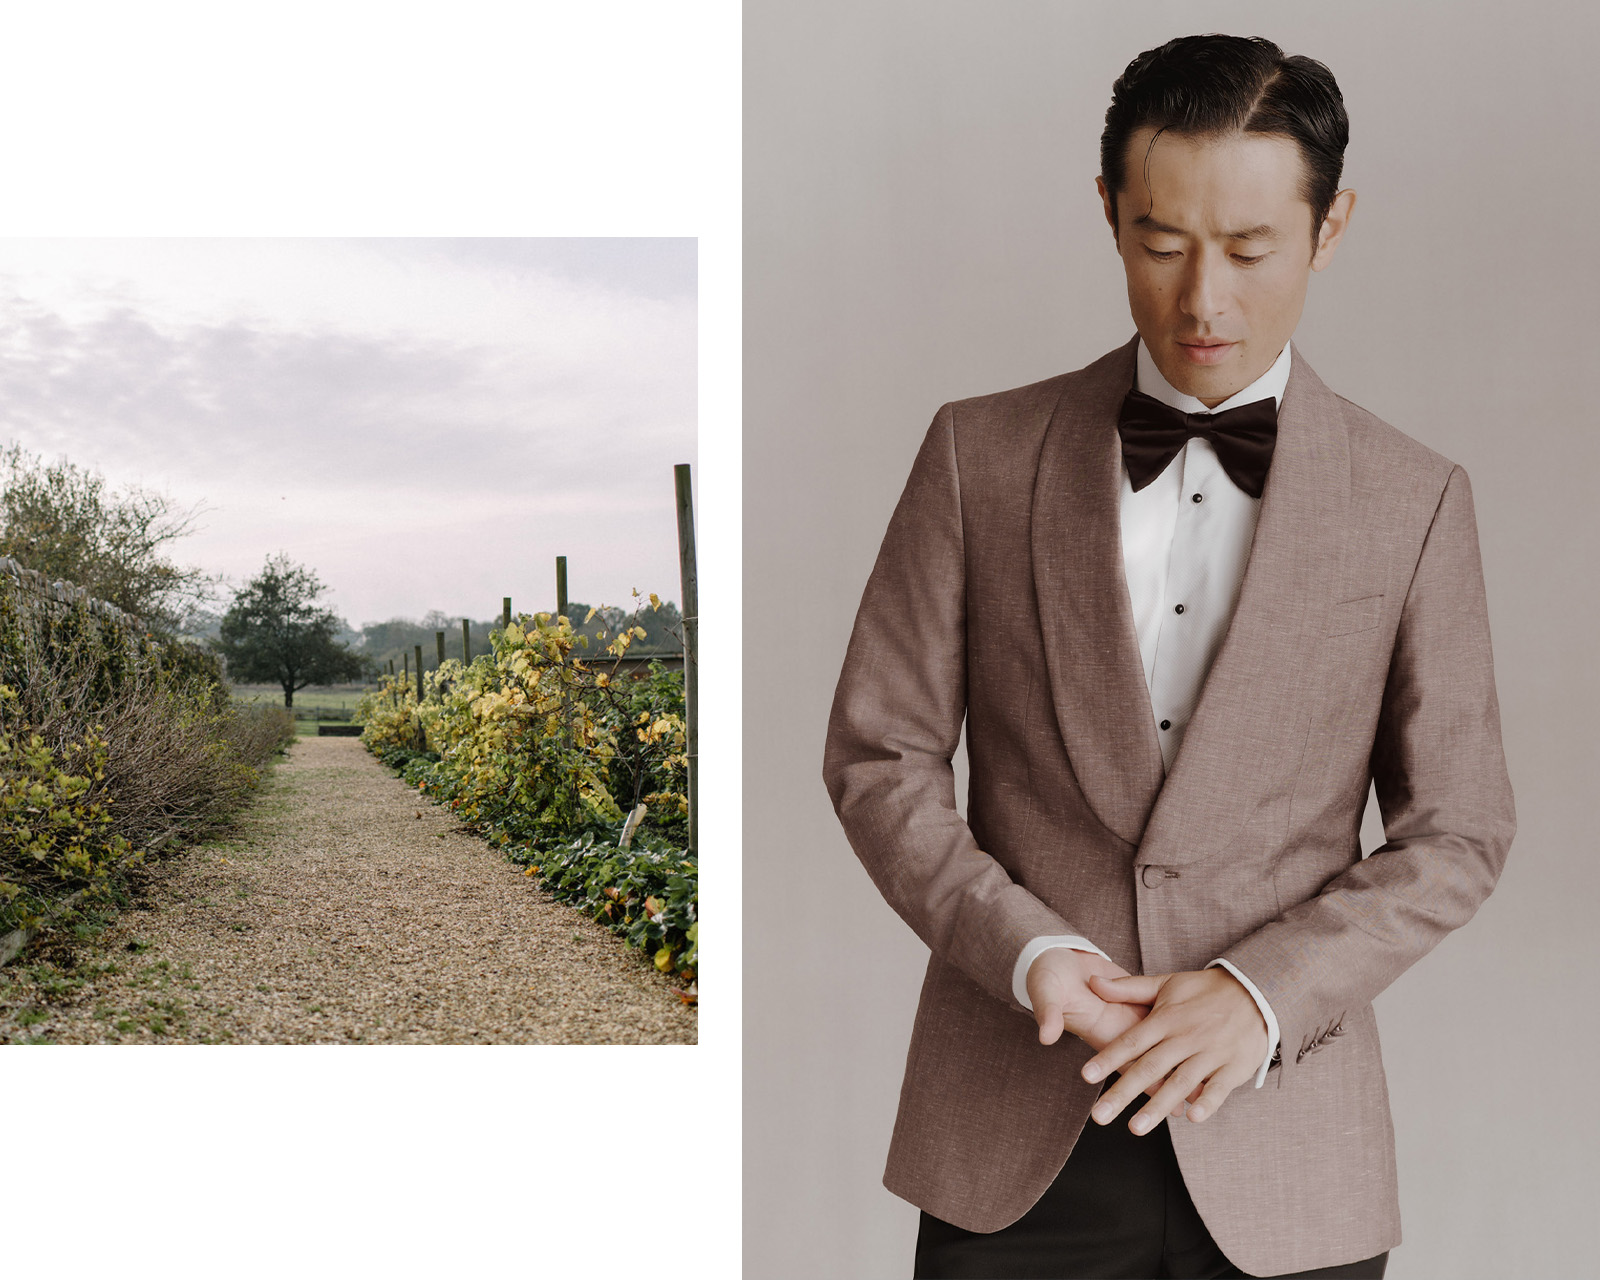 An image of a vineyard beside a man in a charcoal suit.